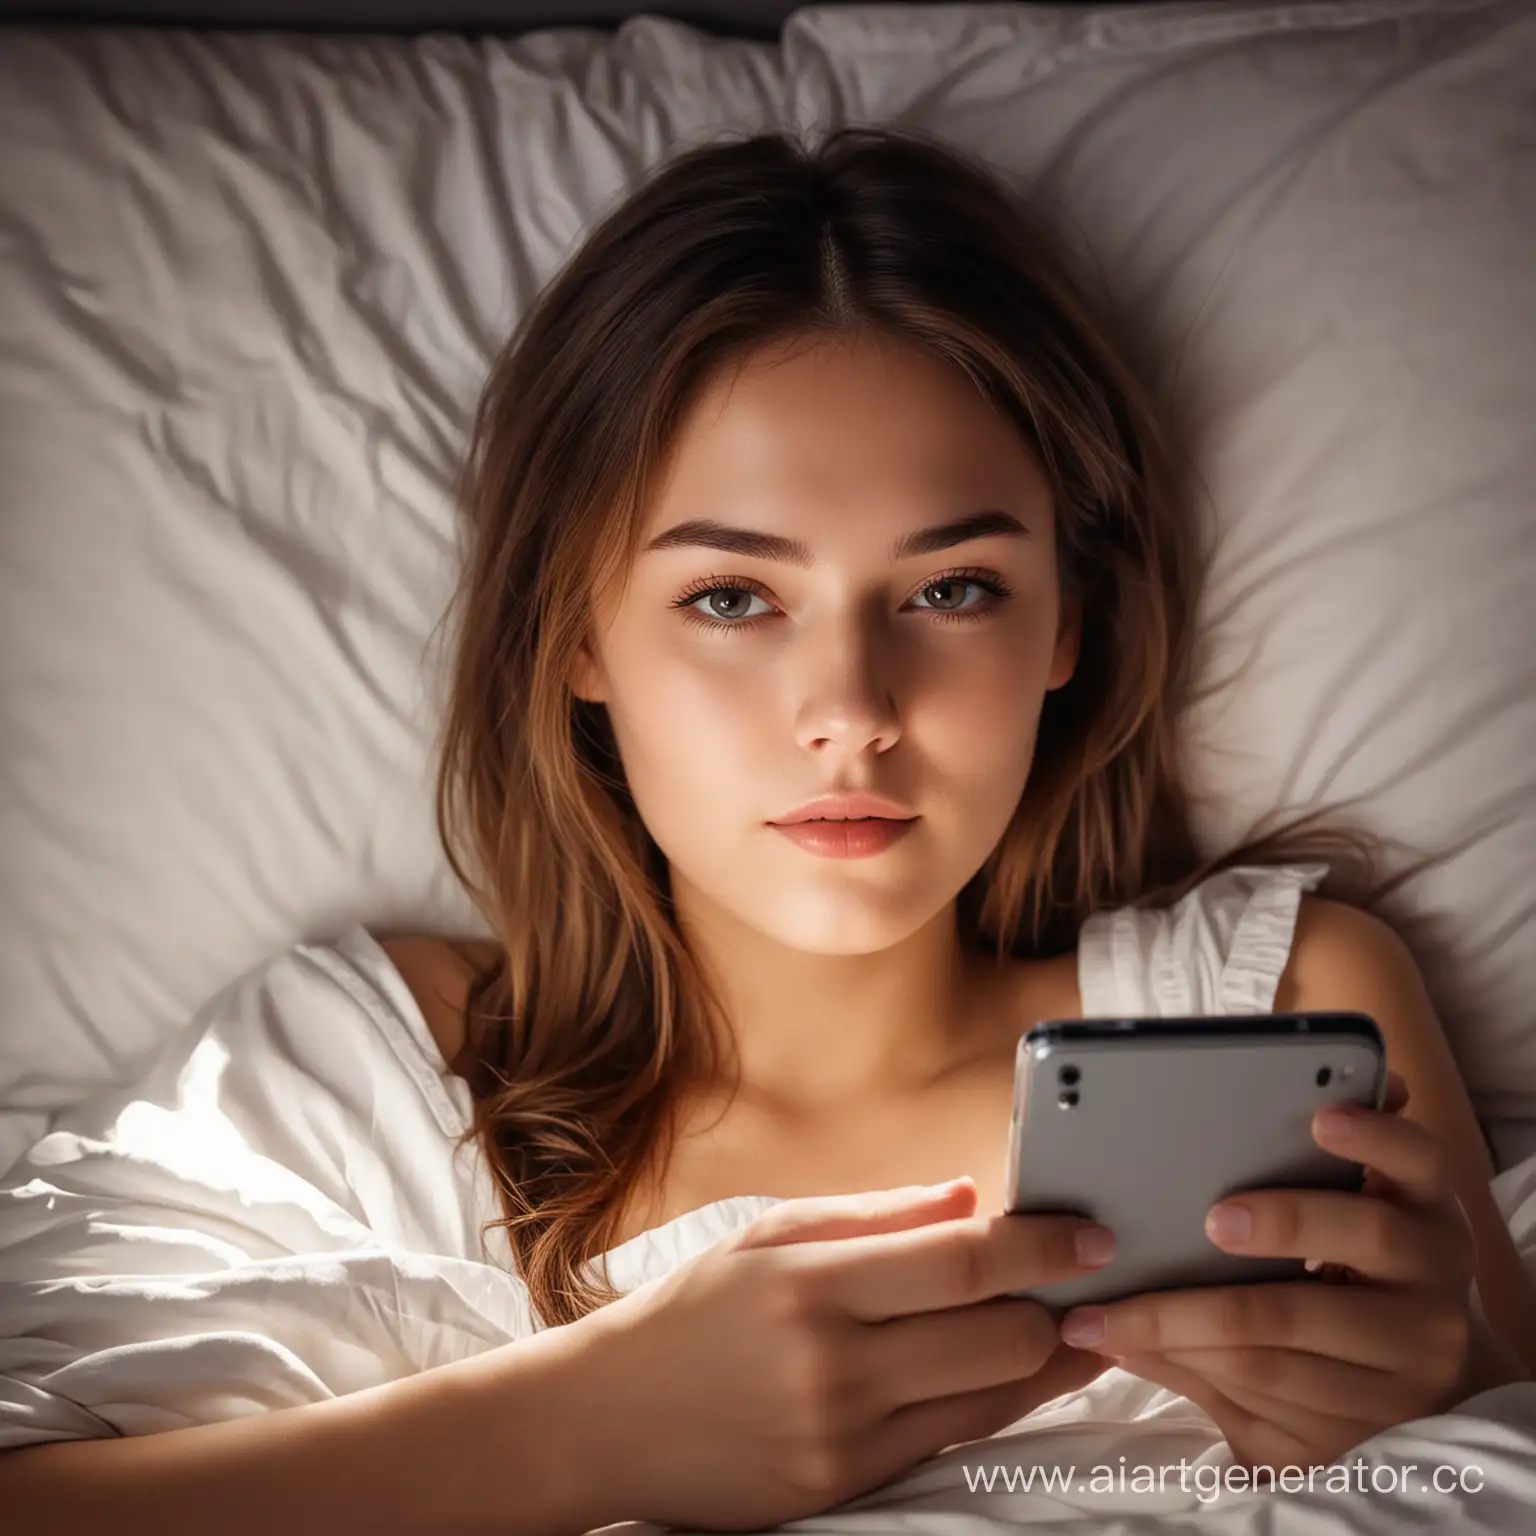 Contented-Girl-Relaxing-in-Bed-with-Smartphone-in-Dim-Light